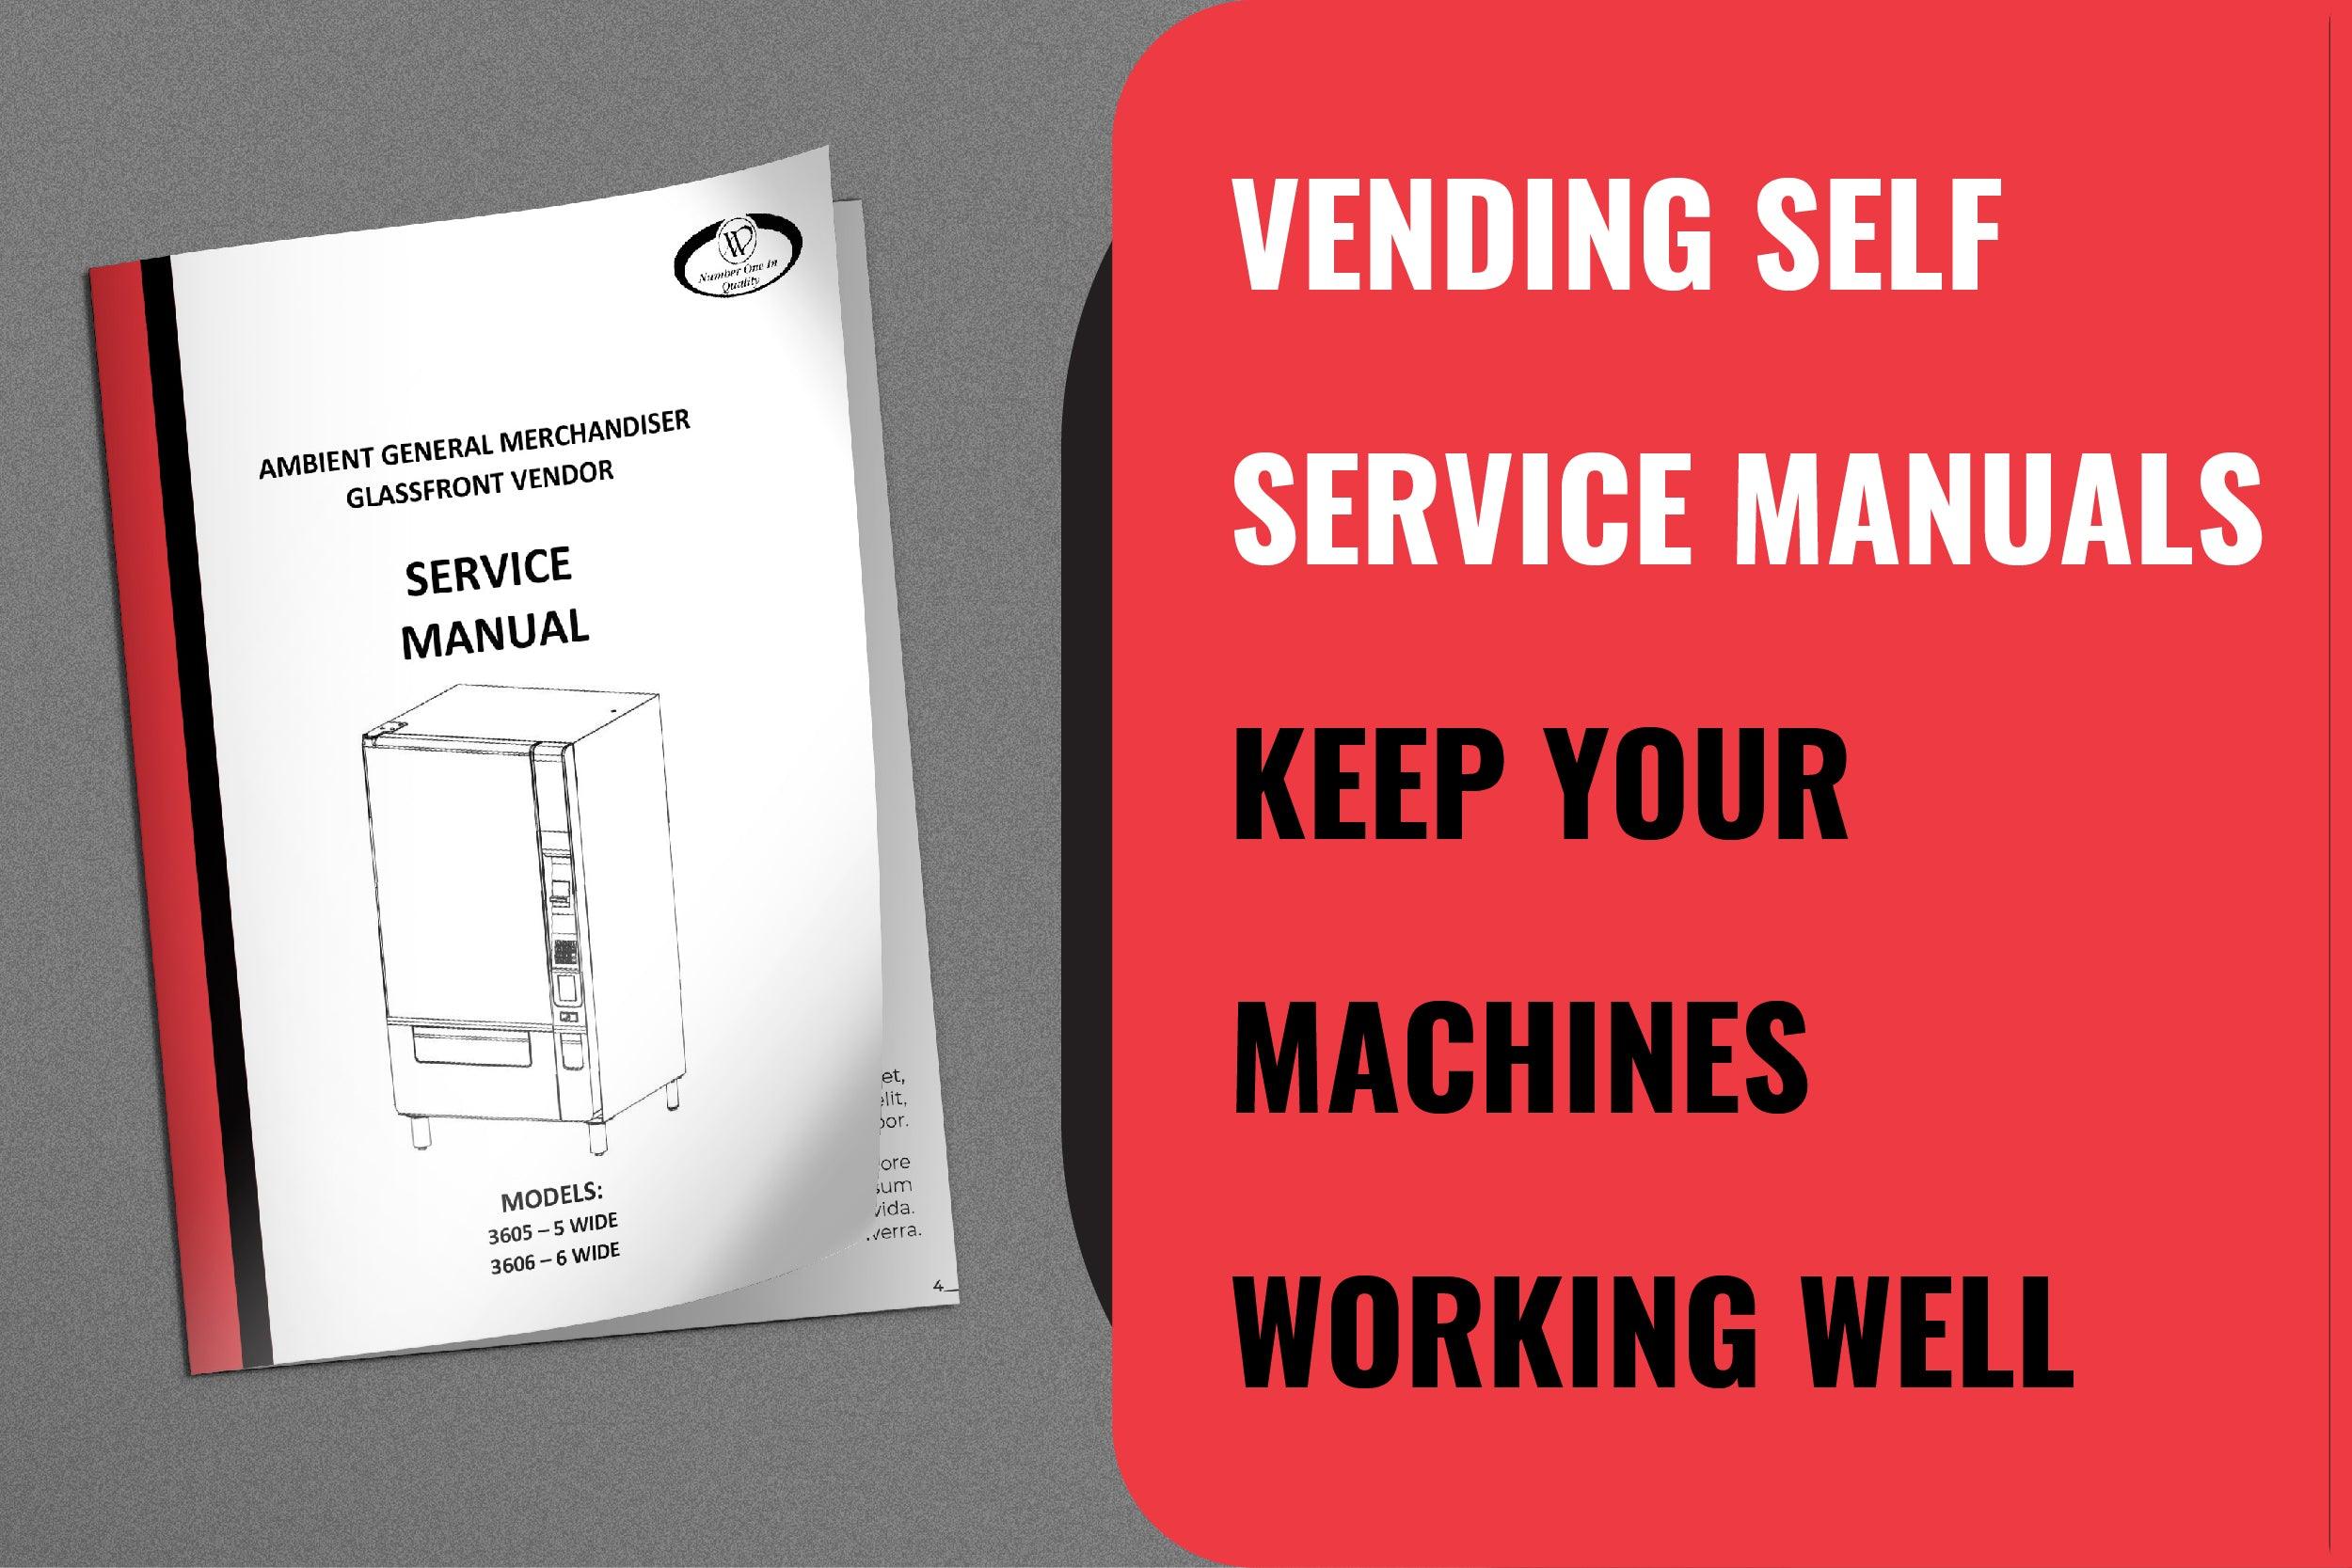 Vending Support: Vending Self Service Manuals Keep Your Machines Working Well - Vendnet